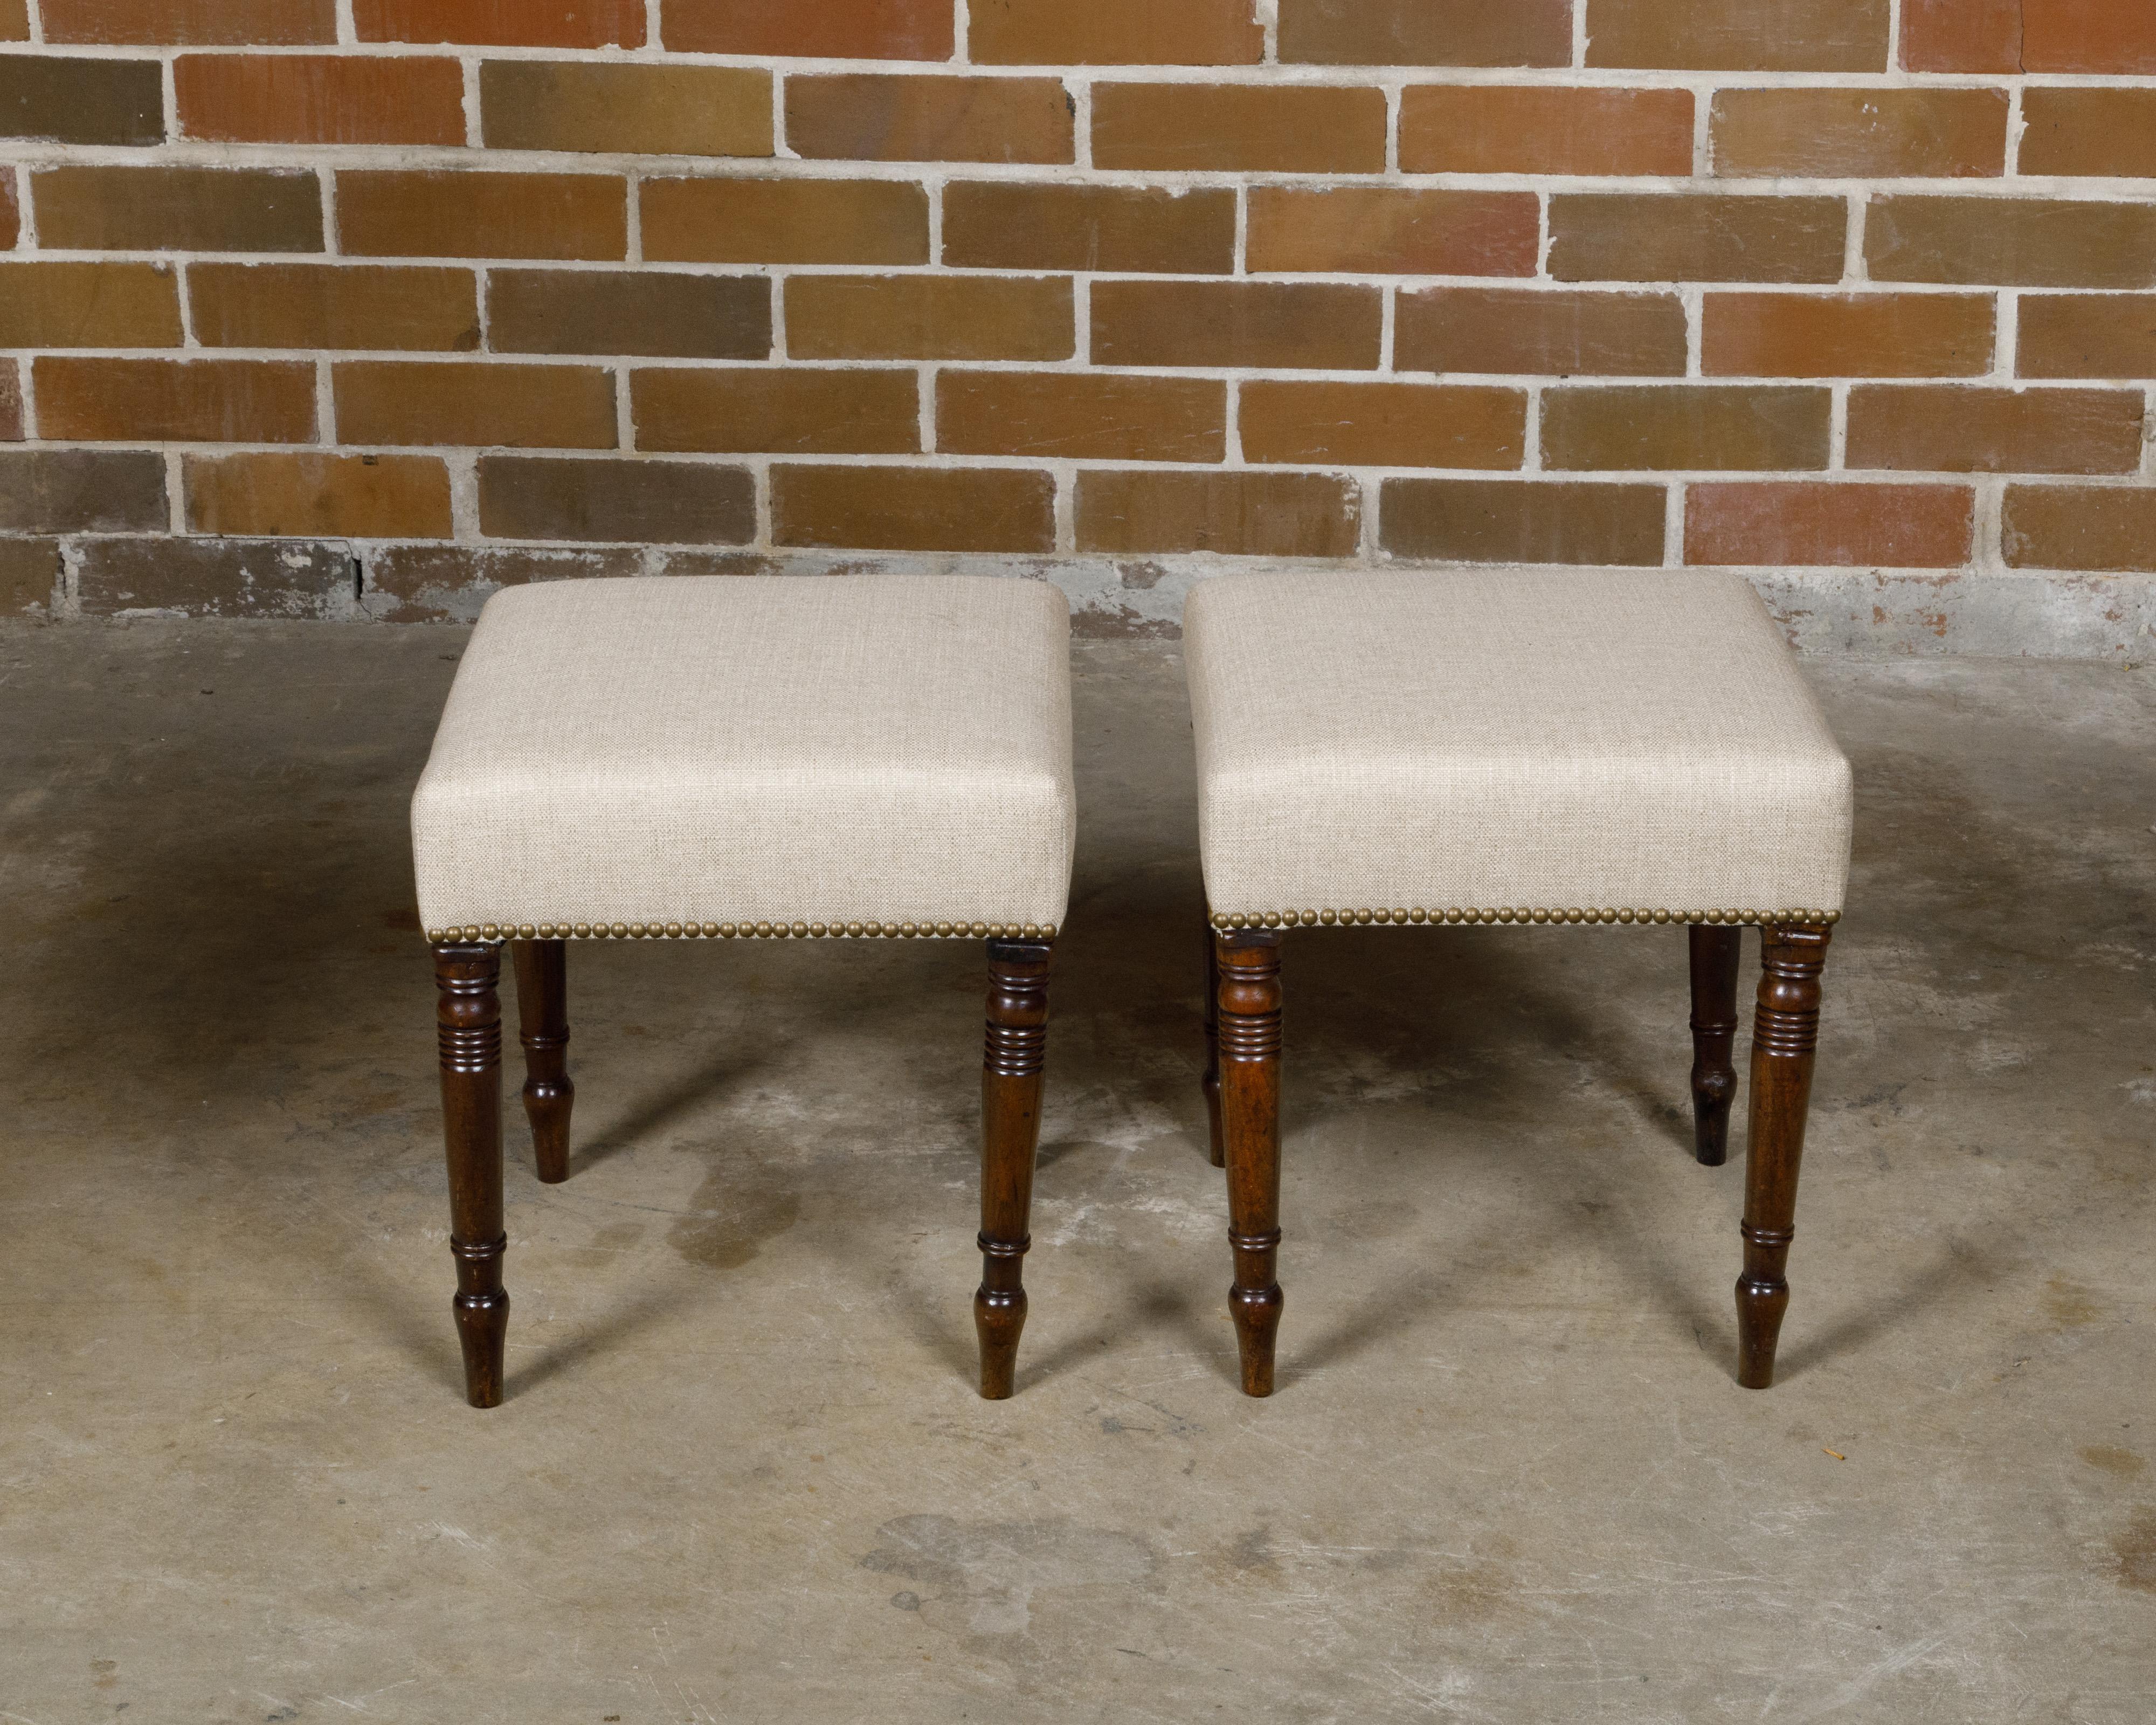 Brass Pair of English Regency 19th Century Mahogany Stools with Turned Spindle Legs For Sale